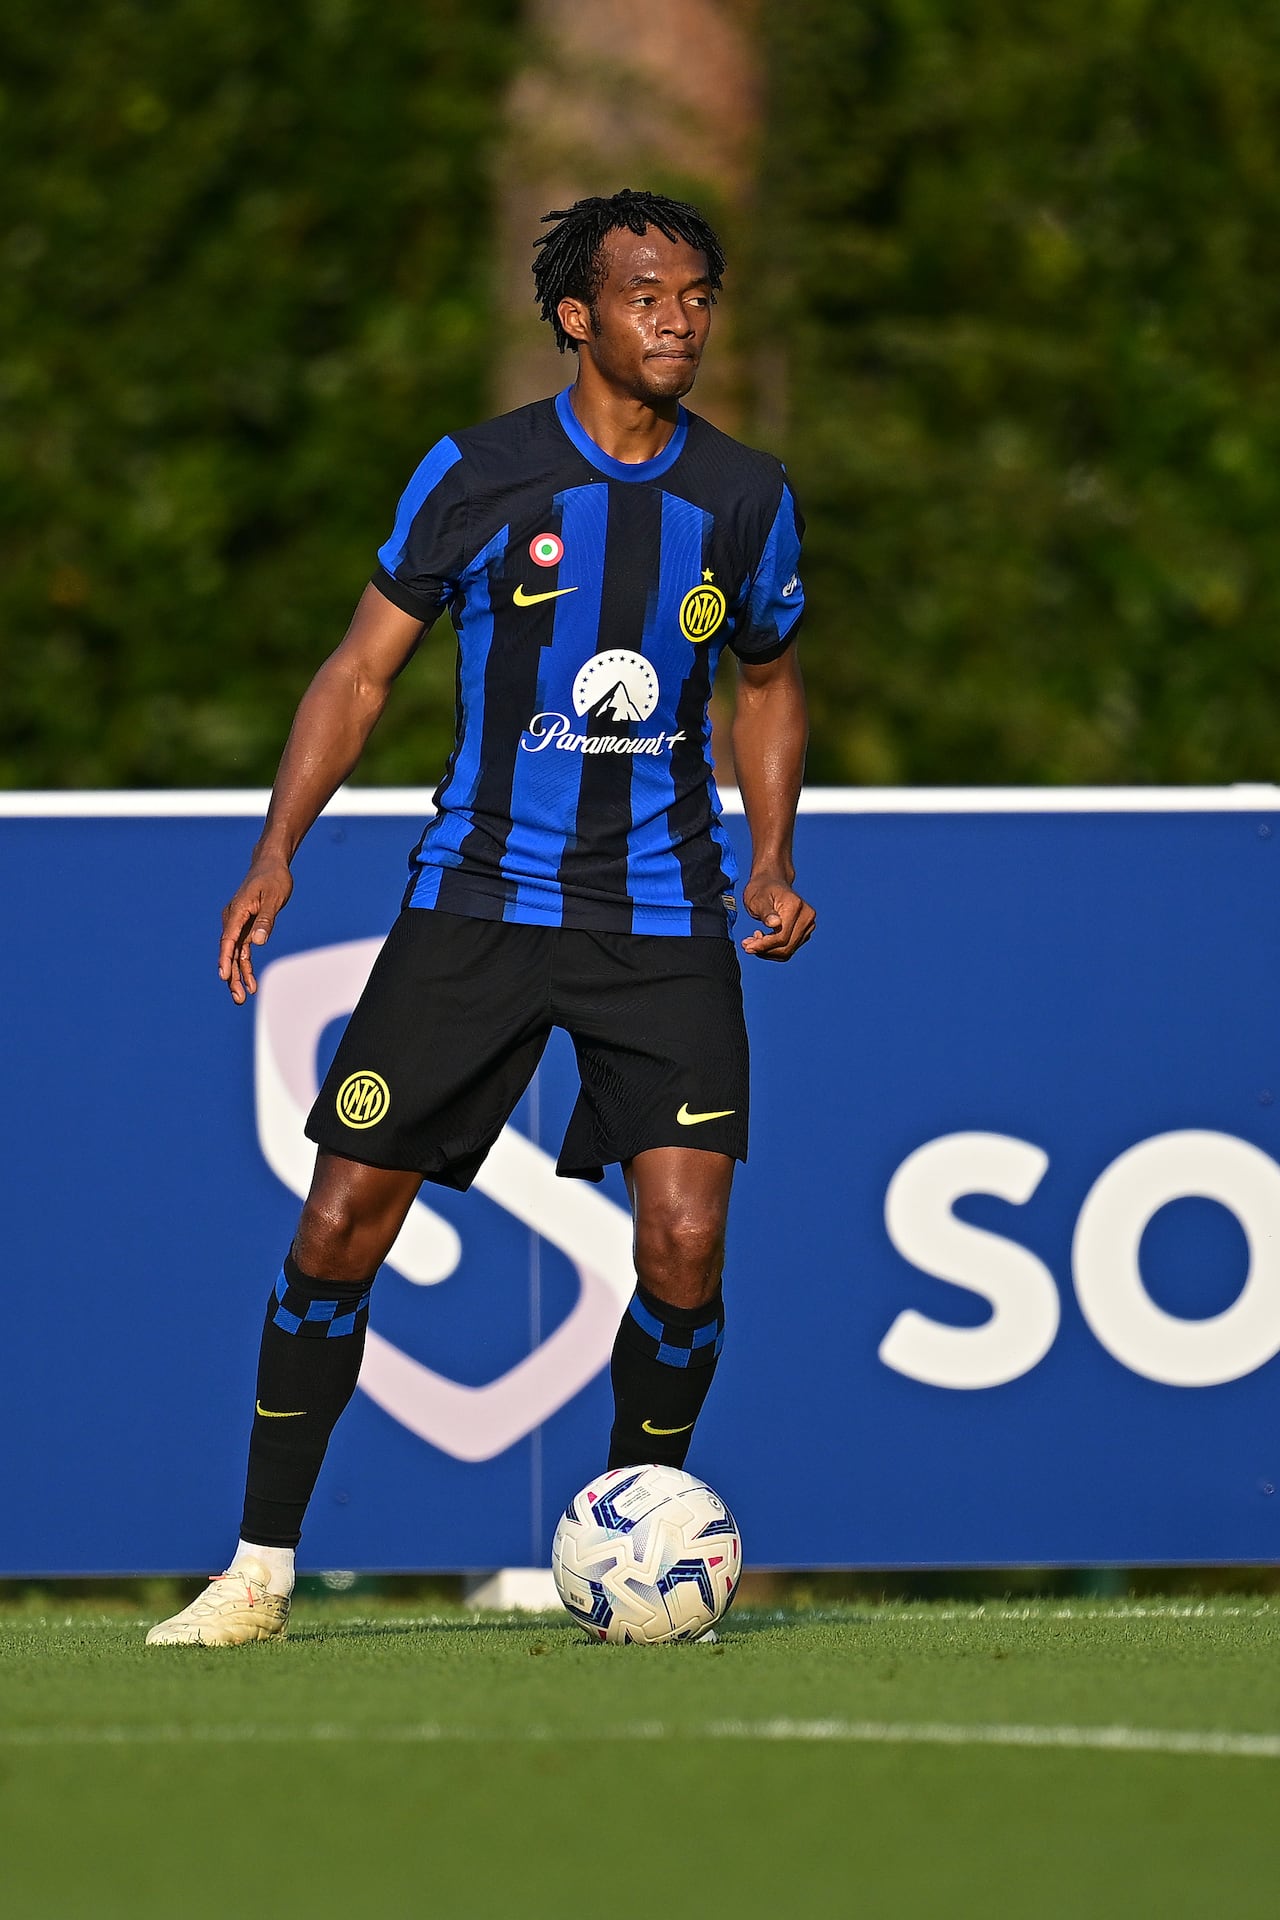 COMO, ITALY - JULY 21: Juan Cuadrado of FC Internazionale in action during the friendly match between FC Internazionale Milano and Pergolettese at Appiano Gentile on July 21, 2023 in Como, Italy. (Photo by Mattia Ozbot - Inter/Inter via Getty Images)